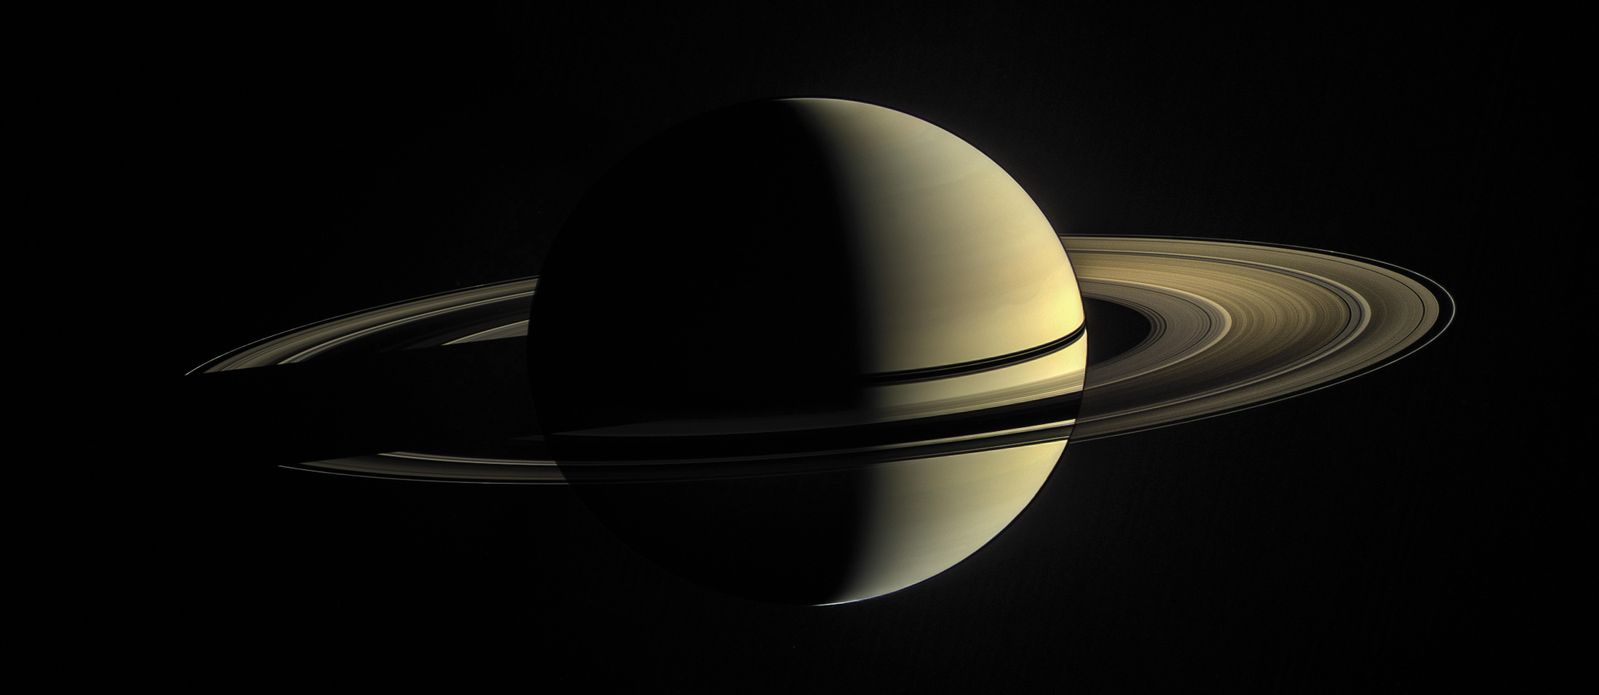 Saturn Could Lose Its Rings in Less Than 100 Million Years